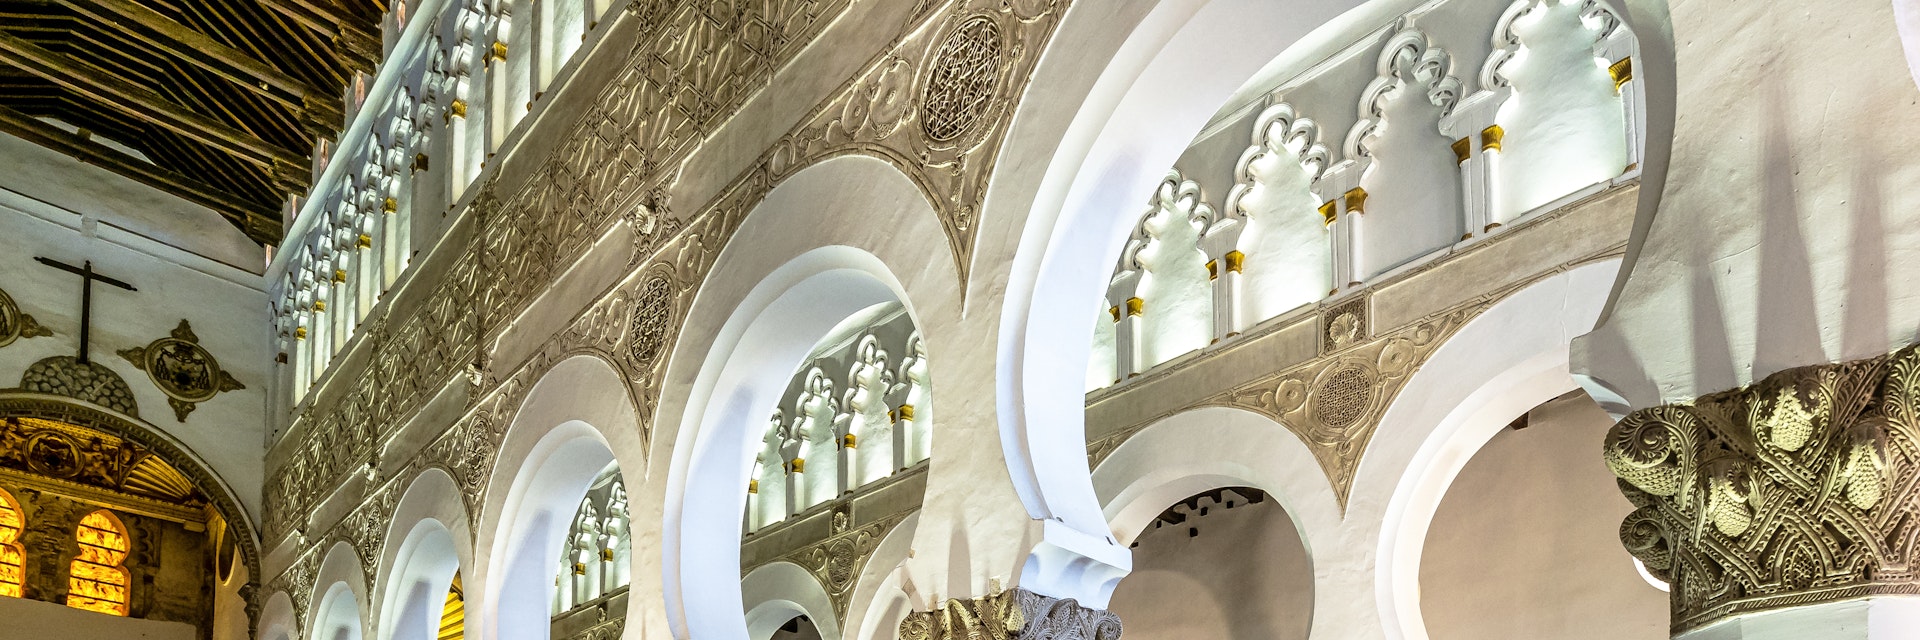 White arches at Ancient Sinagoga de Santa Maria La Blanca, Synagogue in the historical center of Toledo, Spain. Erected in 1180 and is considered the oldest synagogue building in Europe still standing.